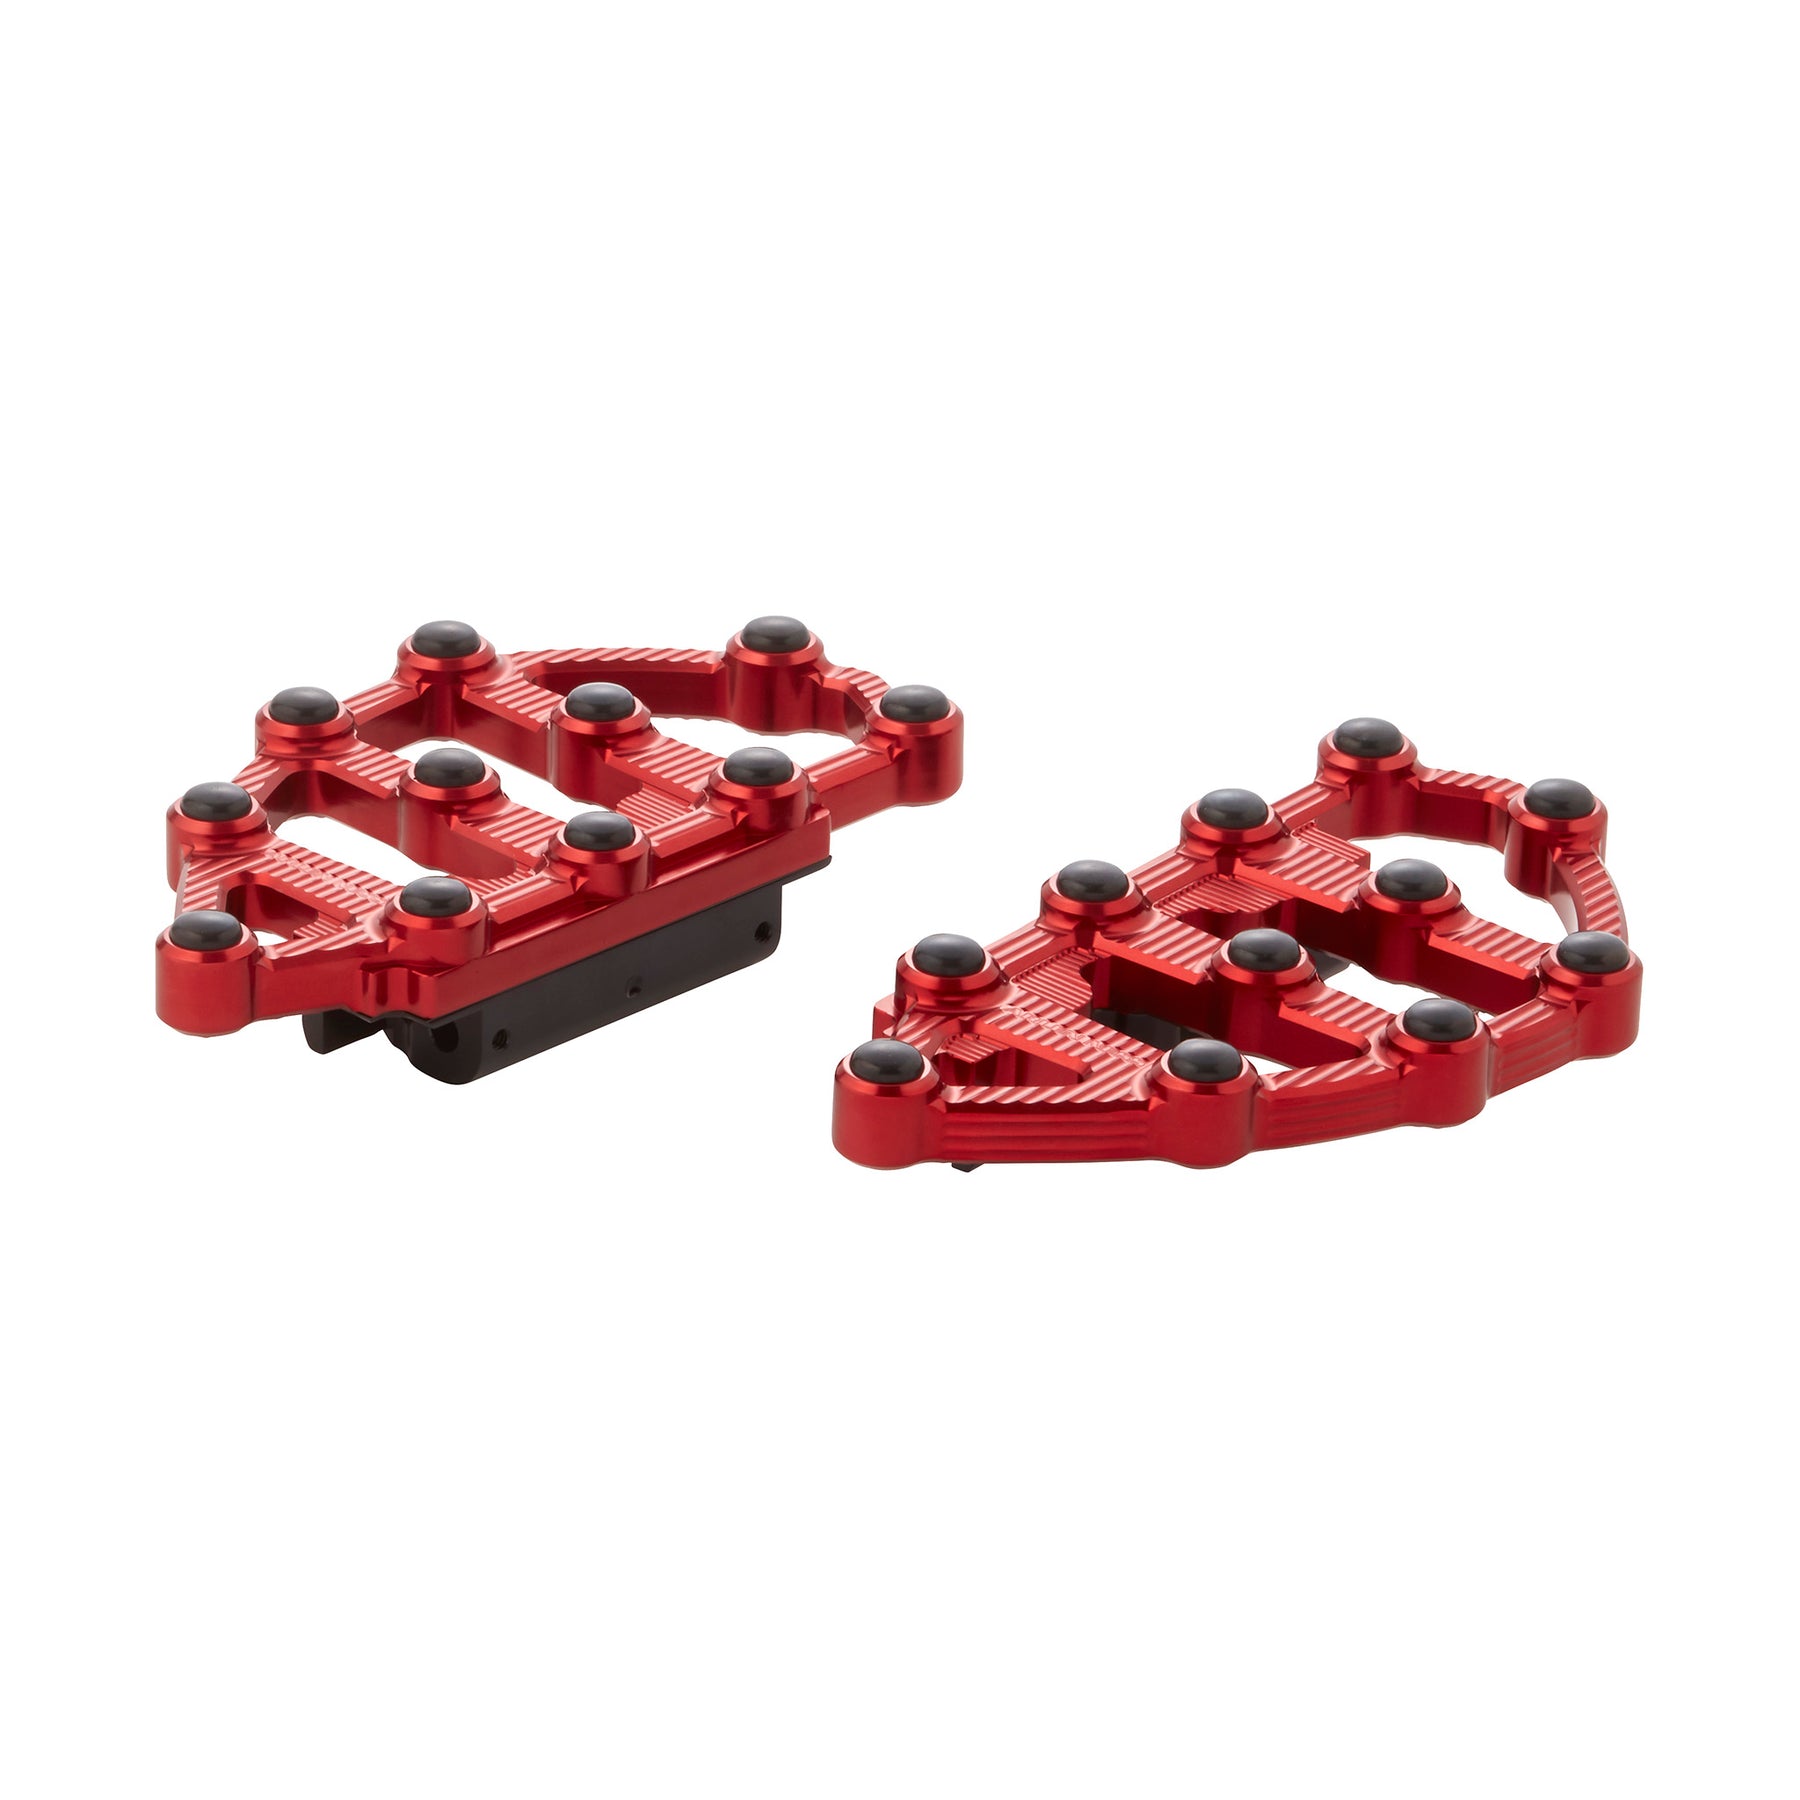 Ness-MX Passenger Floorboards for Indian®, Red